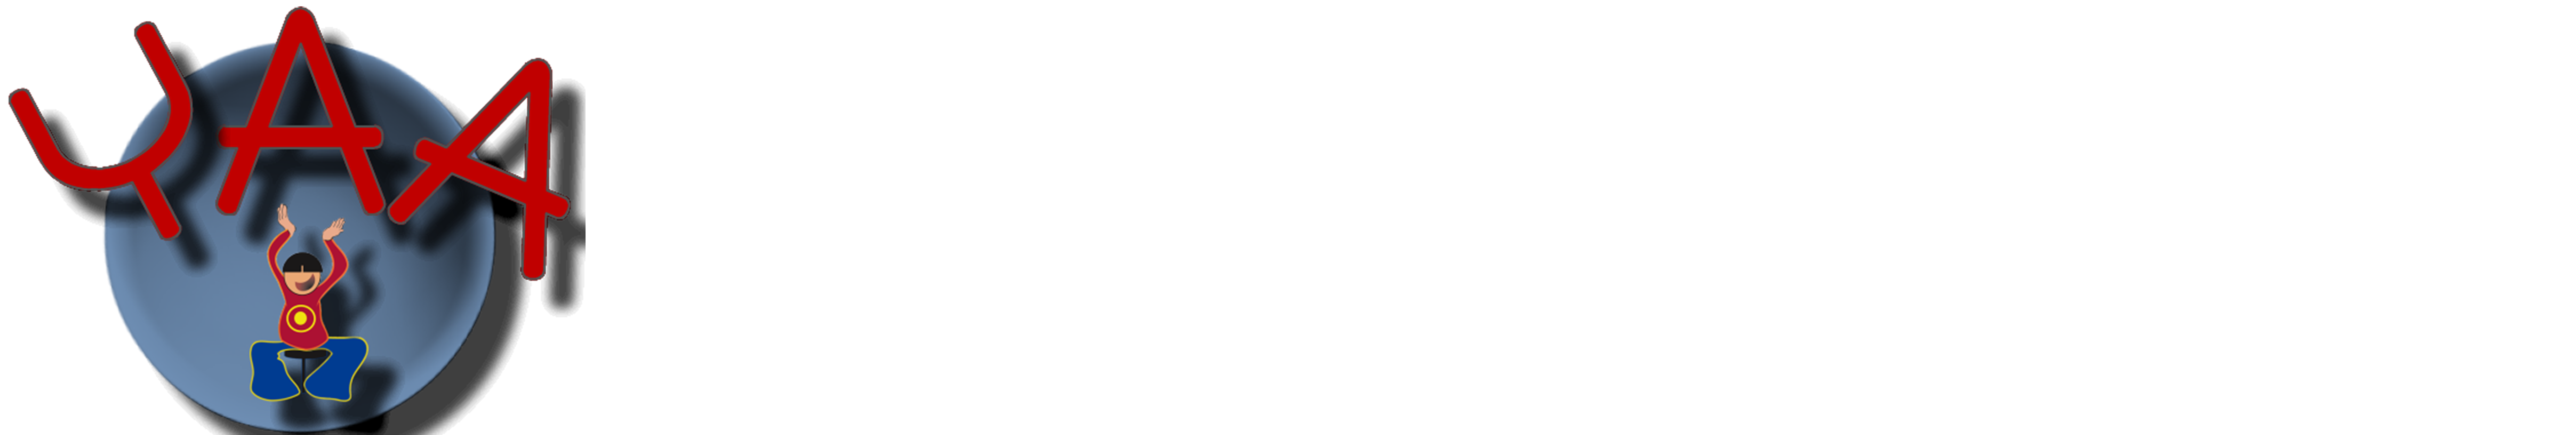 Youth Achievement of America, Inc.